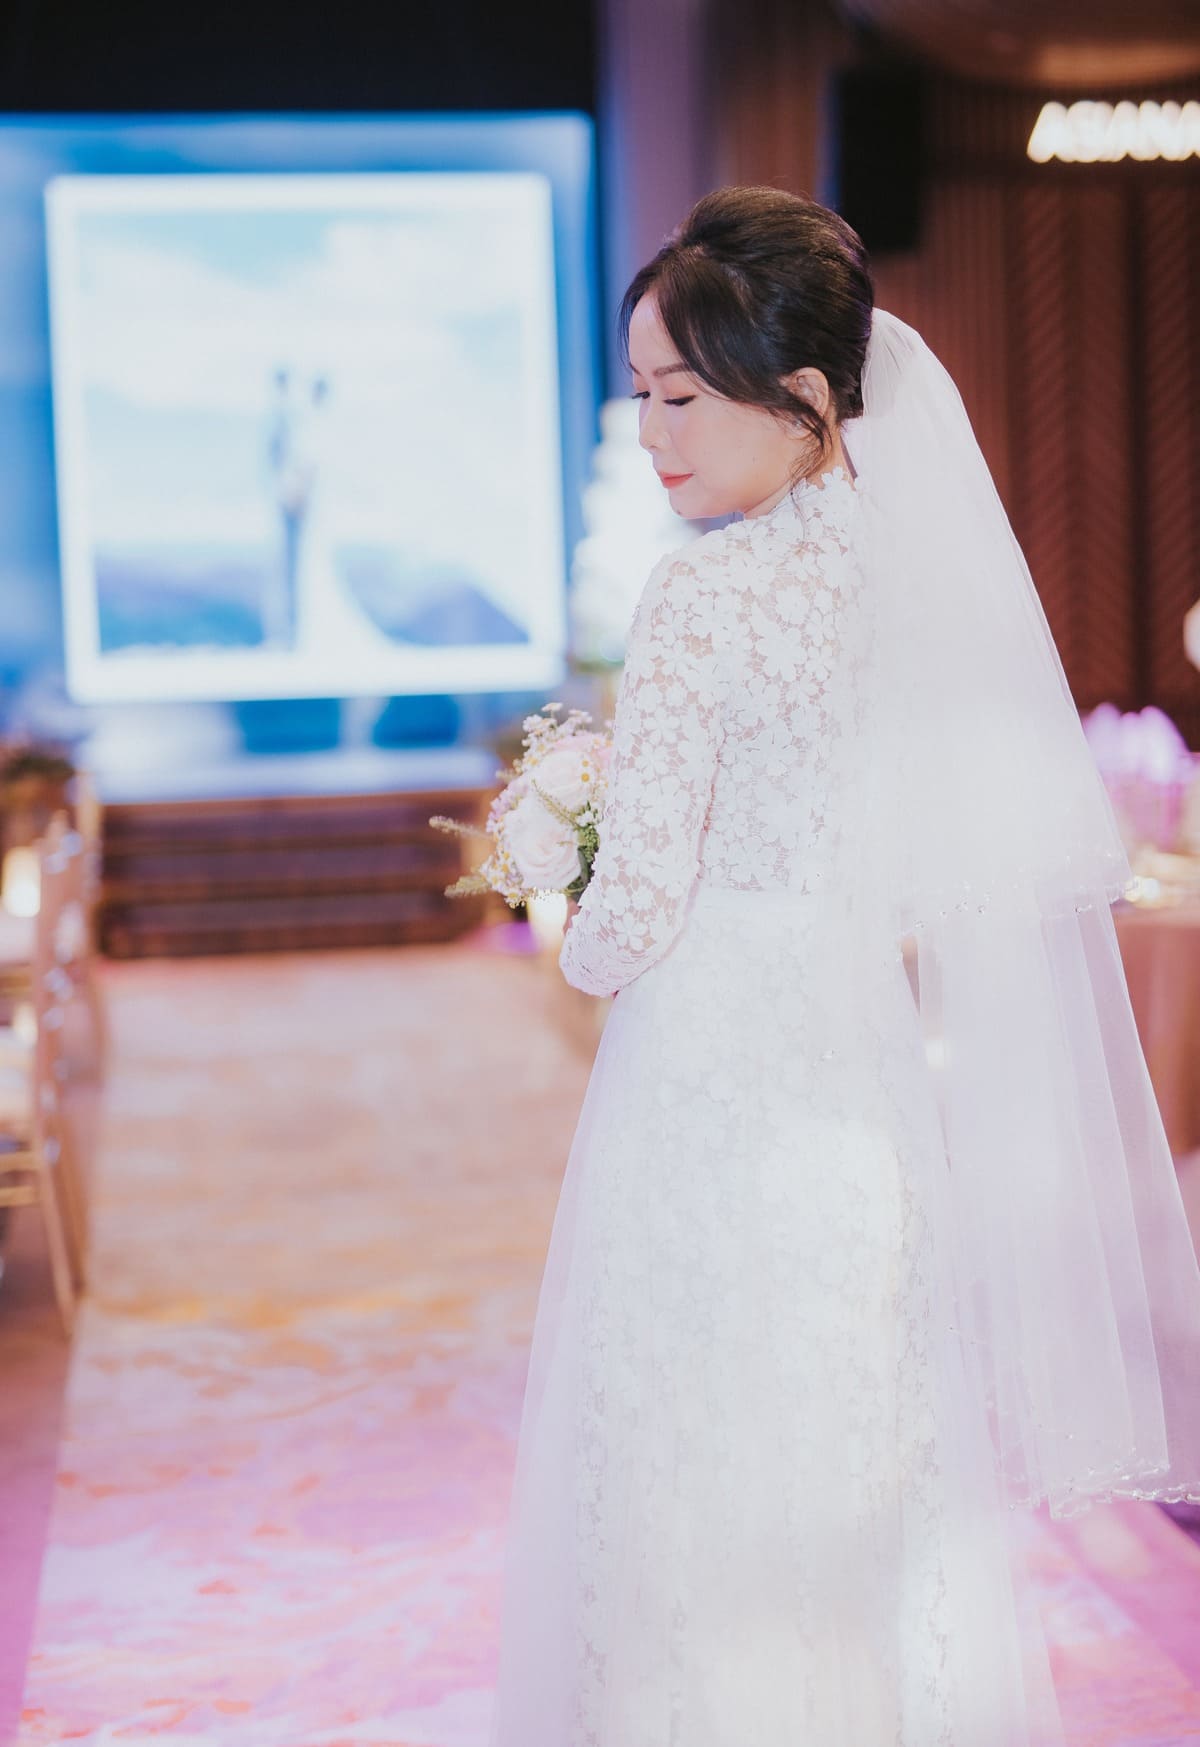 A Beautiful Bride in White Wedding Gown